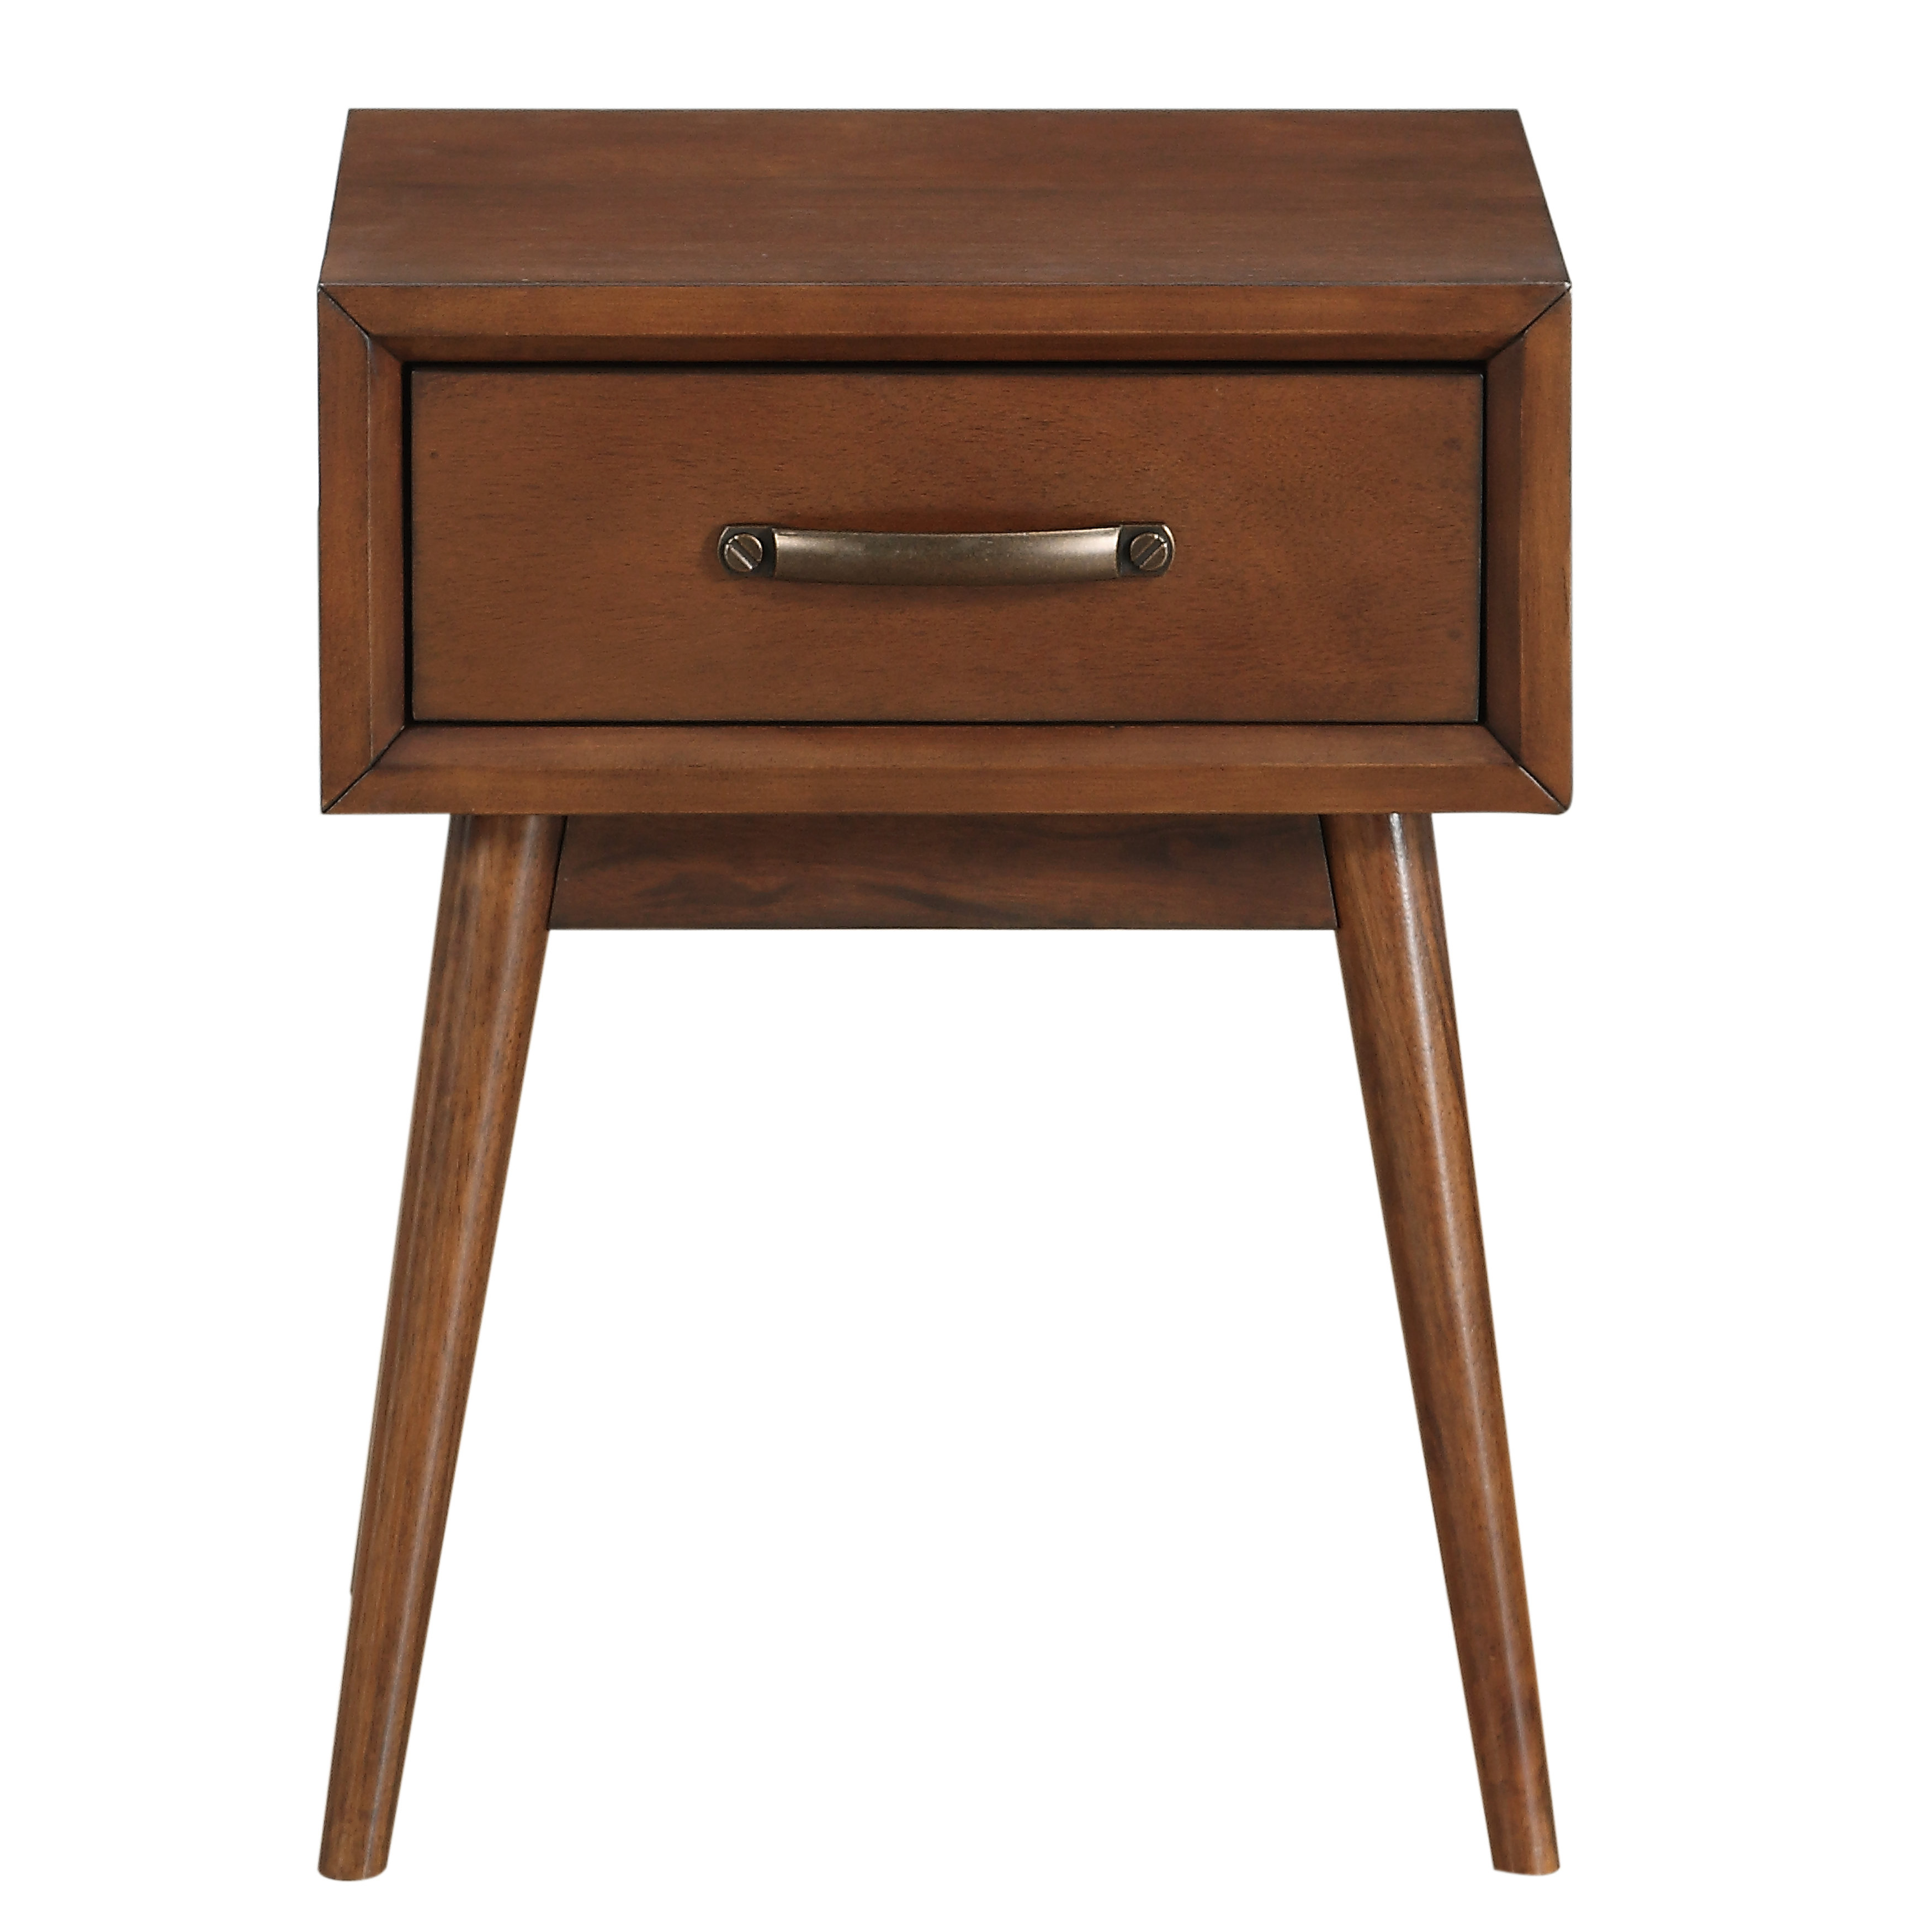 george oliver ripton mid century modern end table reviews tables conduit furniture round seats small white gloss coffee great nightstands traditional square glass top bedside